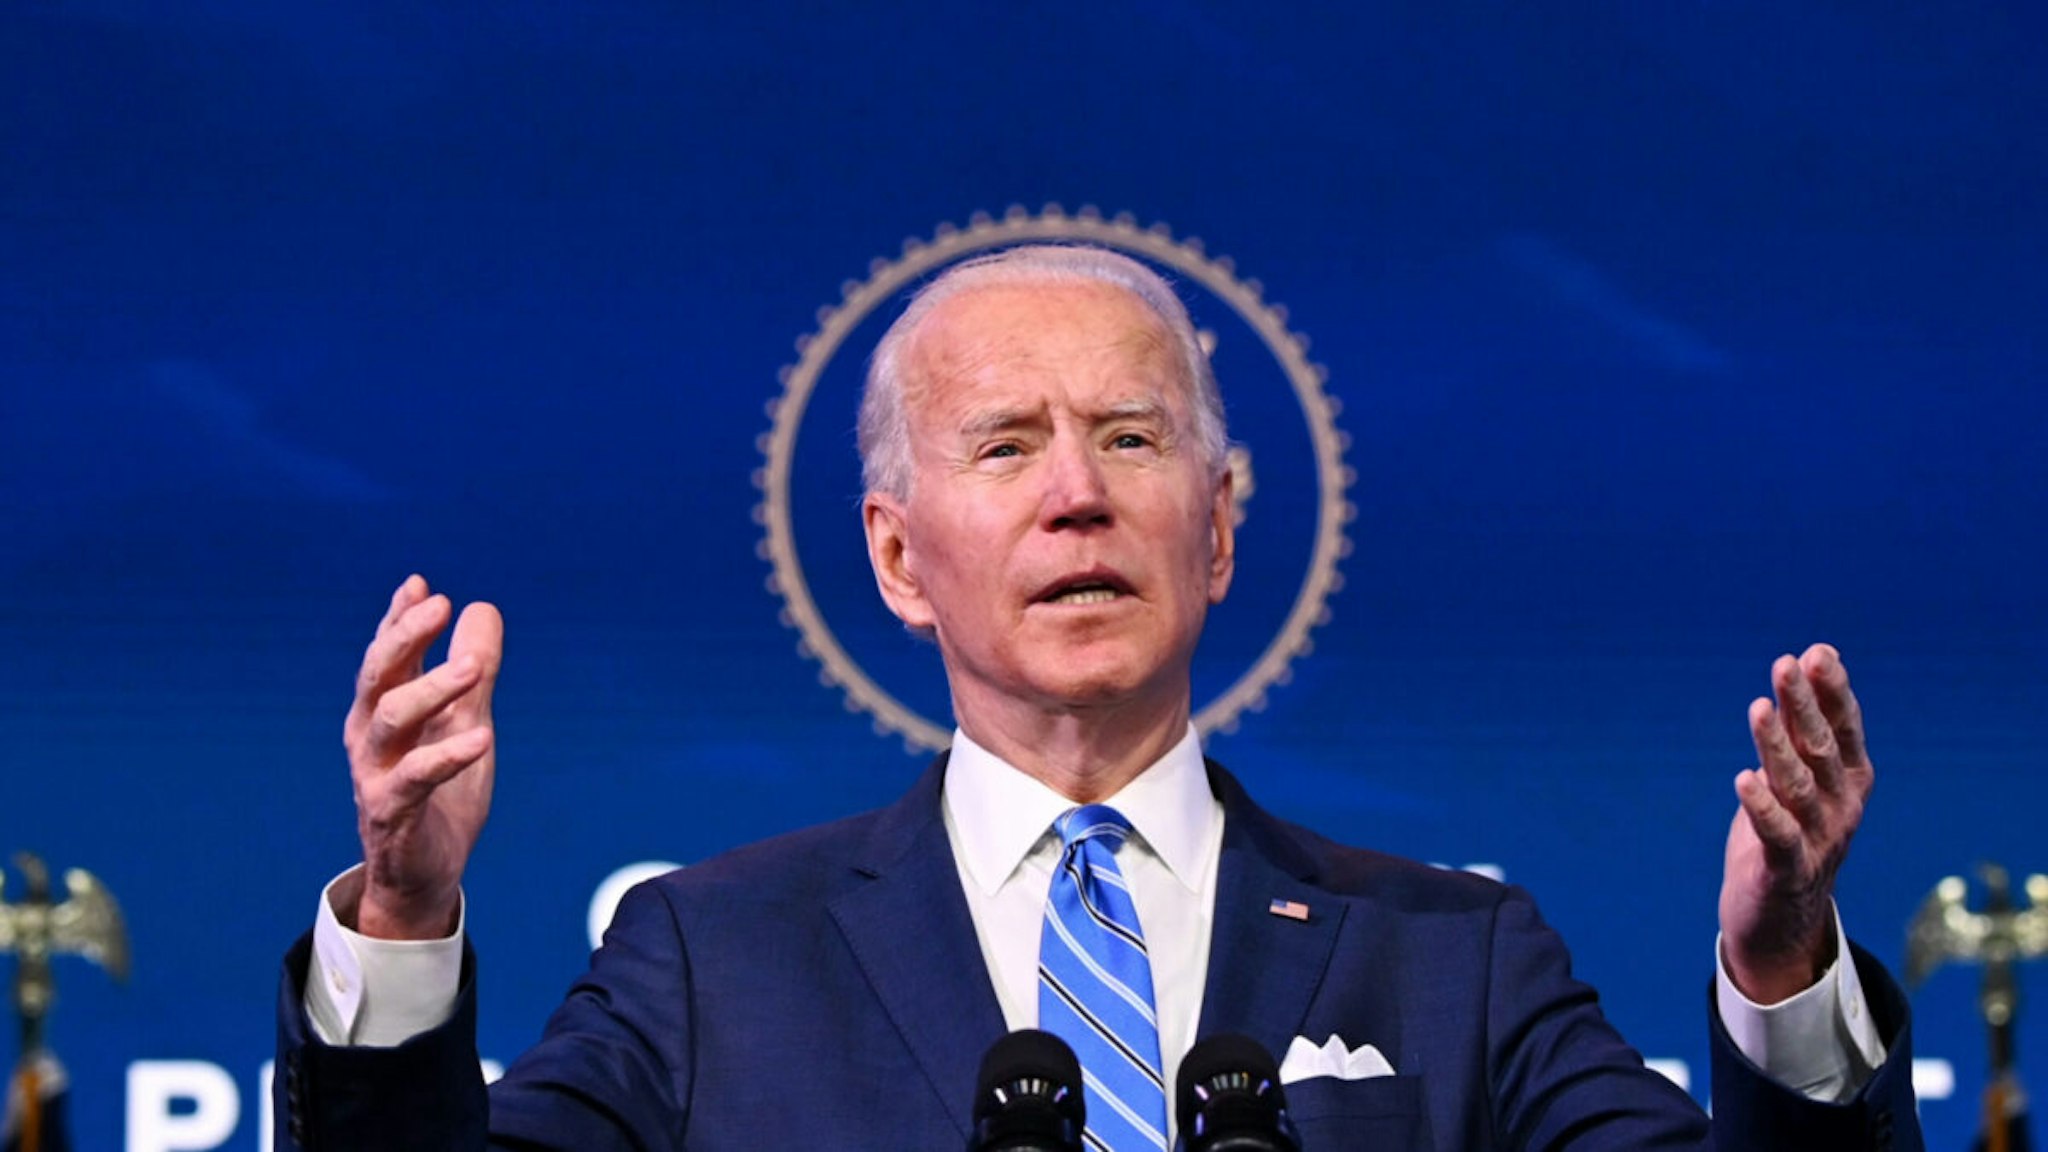 US President-elect Joe Biden delivers remarks on the public health and economic crises at The Queen theater in Wilmington, Delaware on January 14, 2021.